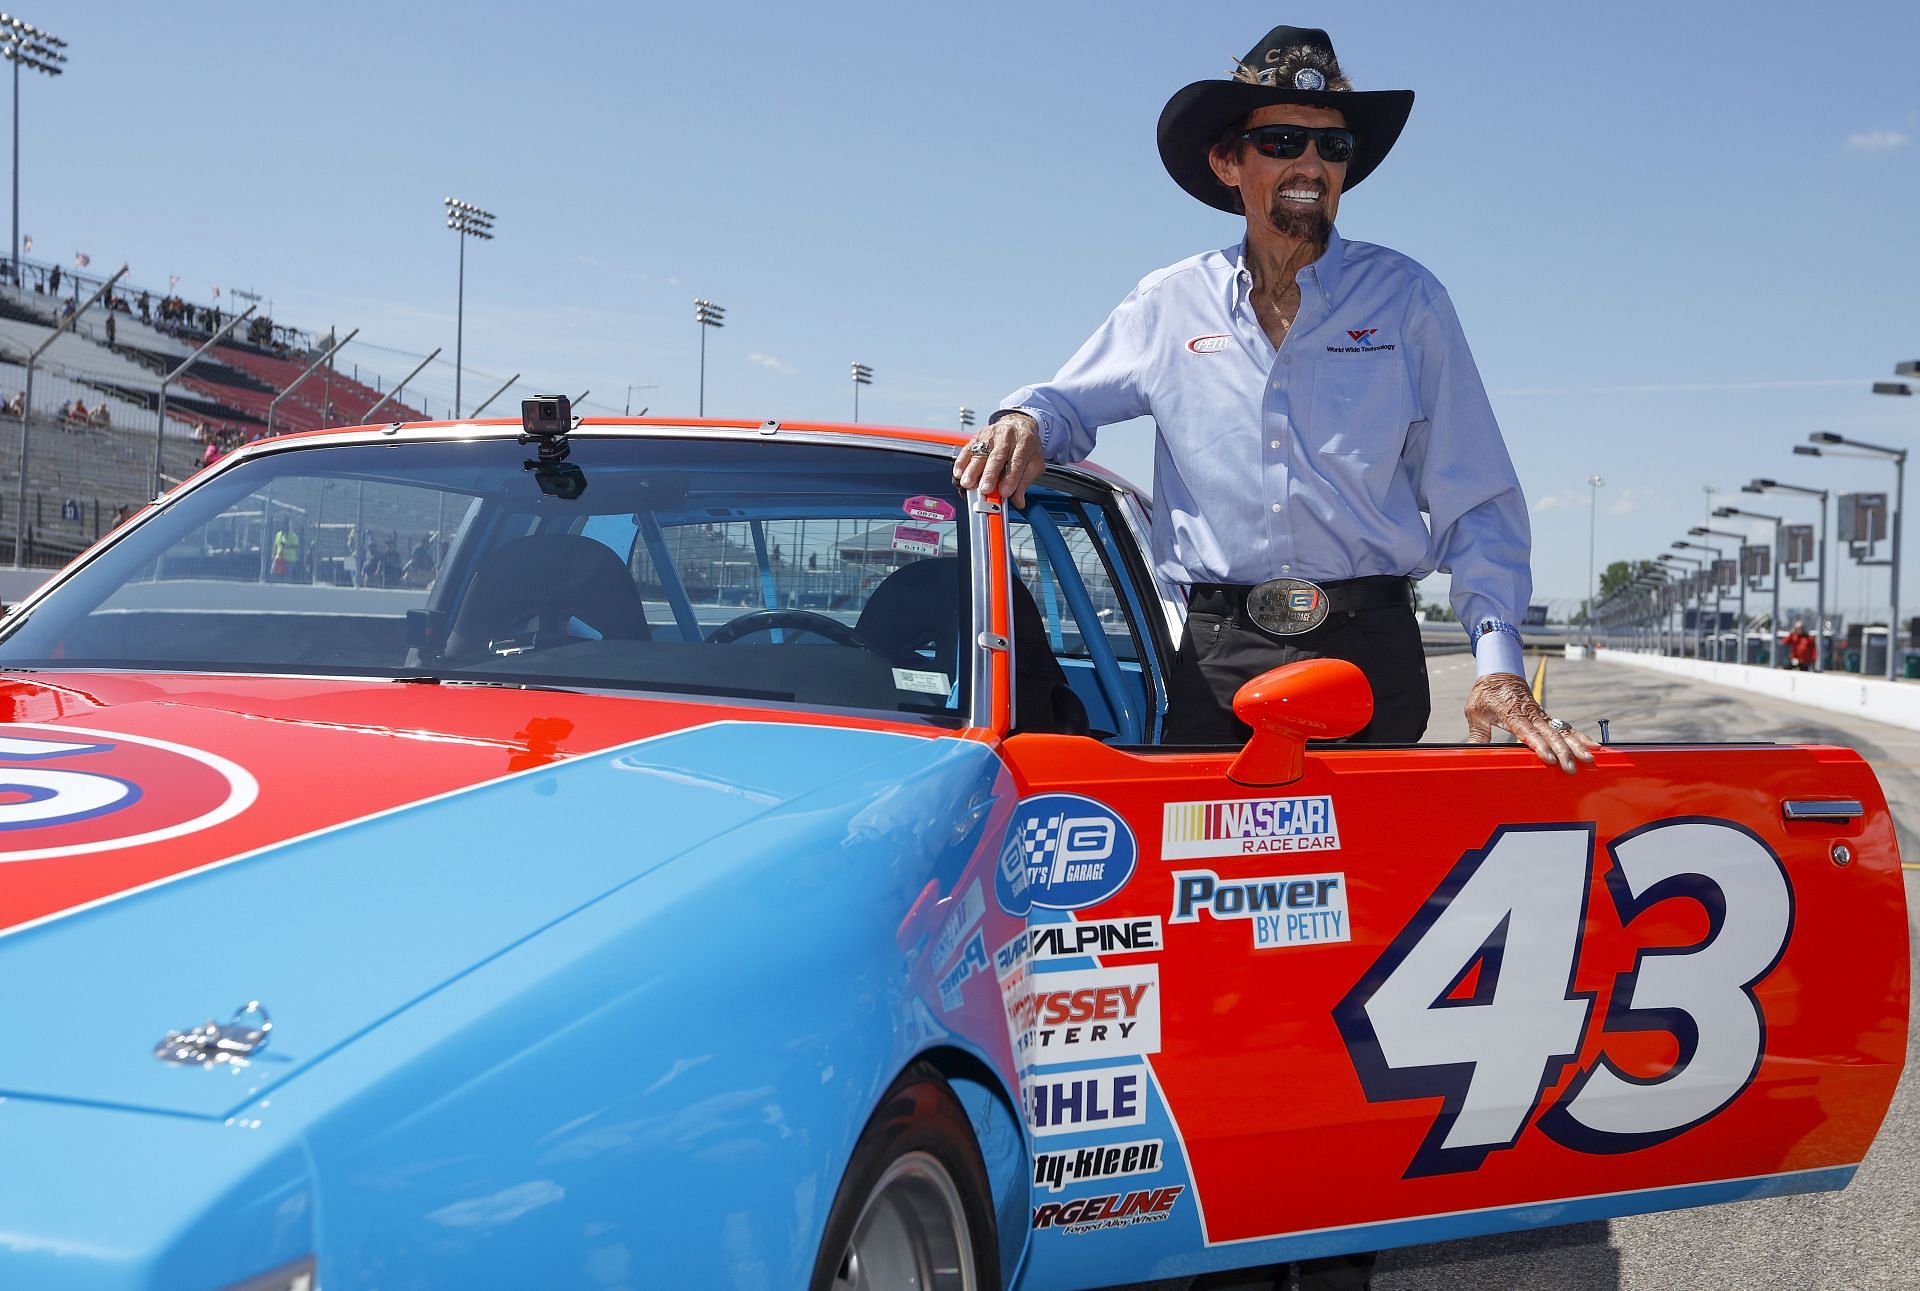 NASCAR Hall of Famer Richard Petty prepares to drive a replica of his #43 STP Pontiac at NASCAR Cup Series Enjoy Illinois 300 at WWT Raceway on June 03, 2022 in Madison, Illinois. (Photo by Sean Gardner/Getty Images)